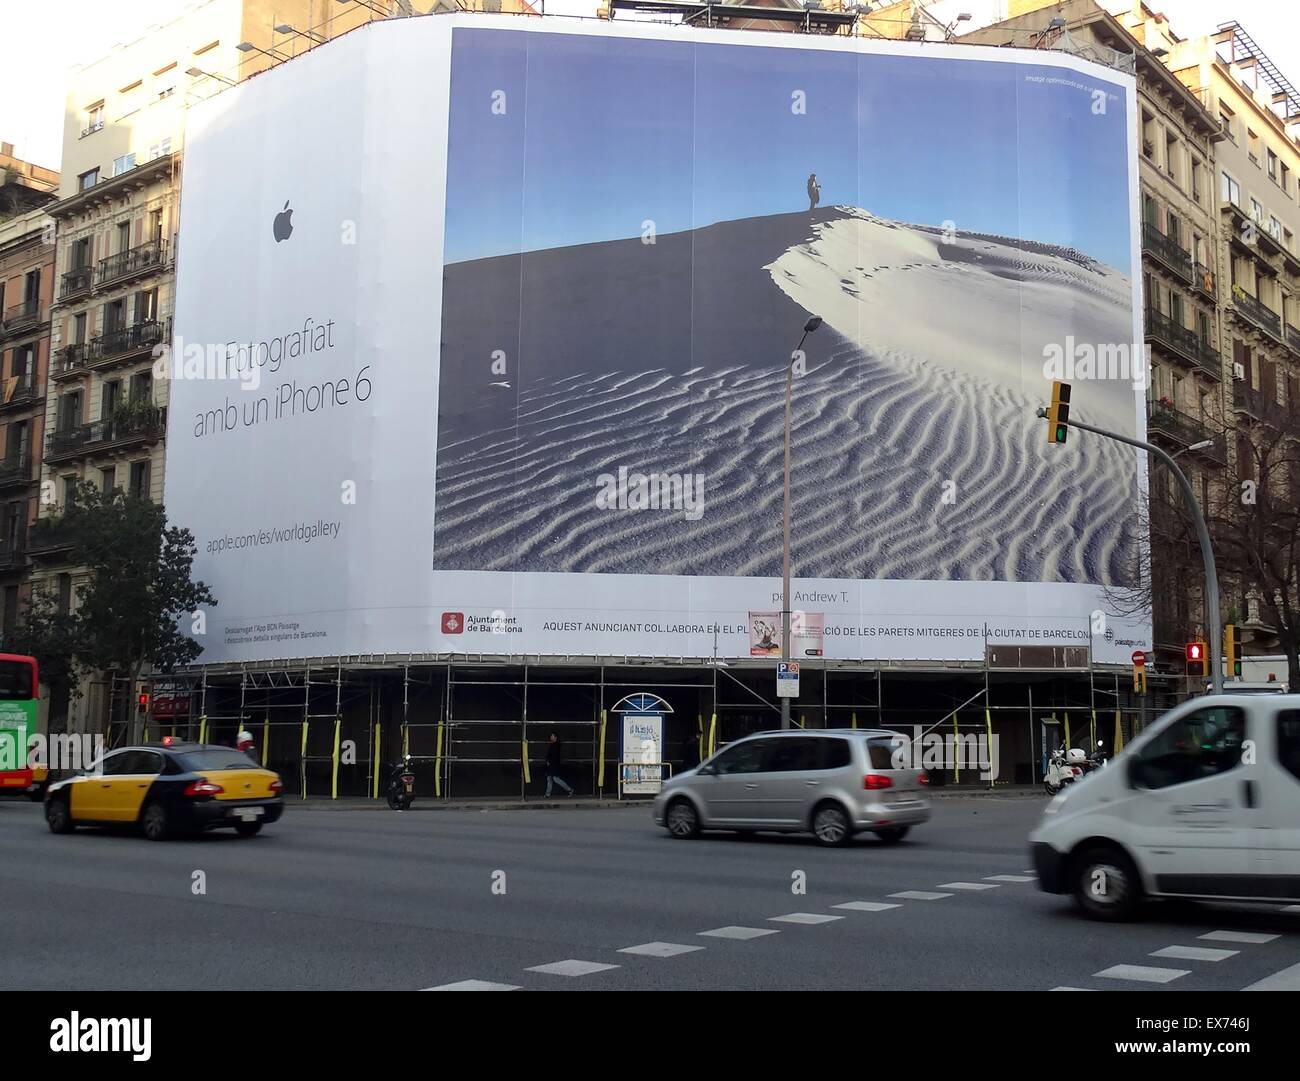 Giant billboard advert for the Apple IPhone 6 in Barcelona, Spain Stock Photo